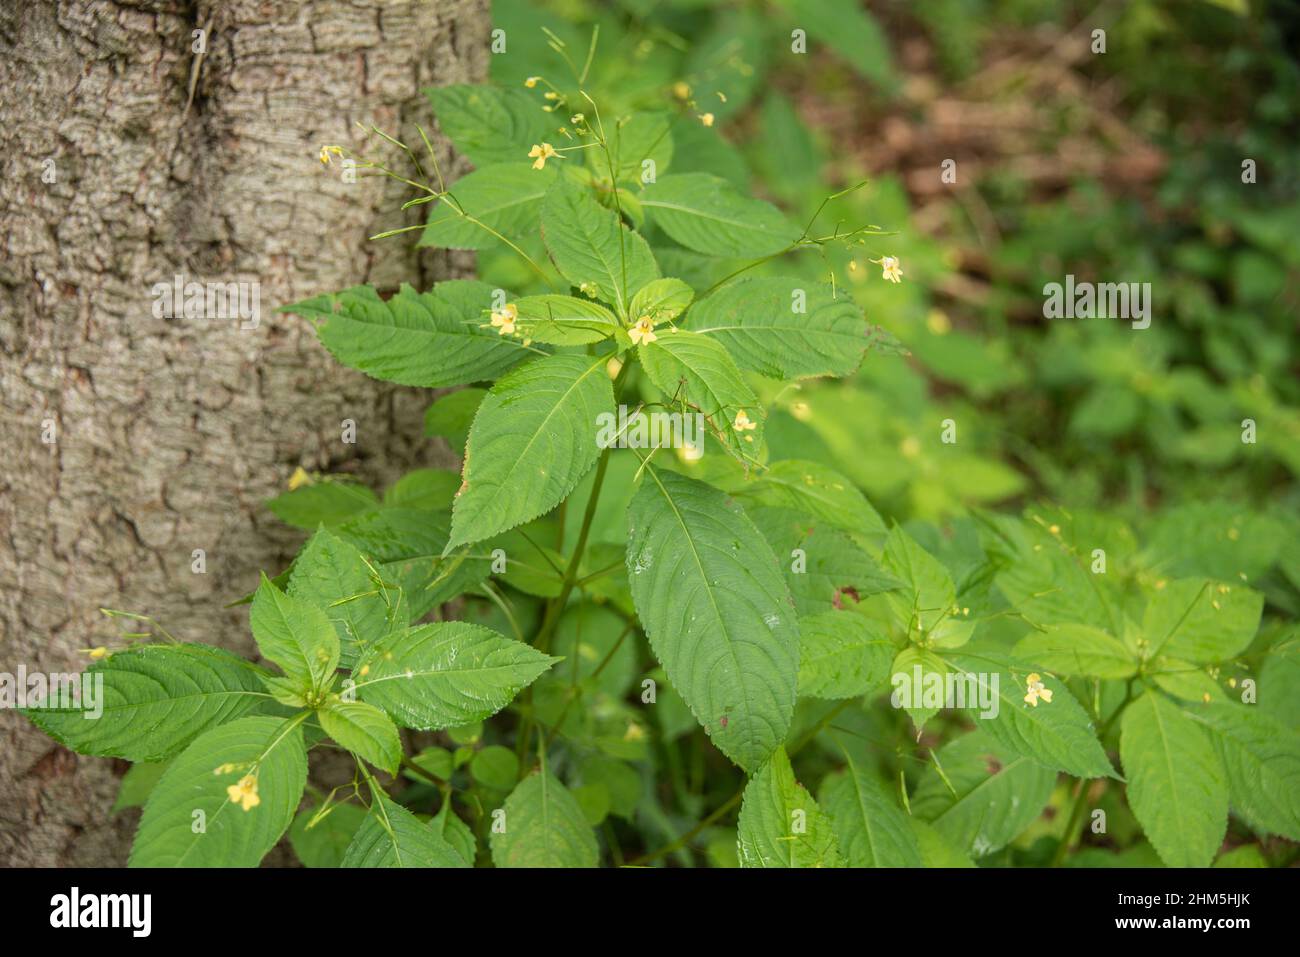 Impatiens noli-tangere with yellow blossoms and long fruits growing in a forest Stock Photo